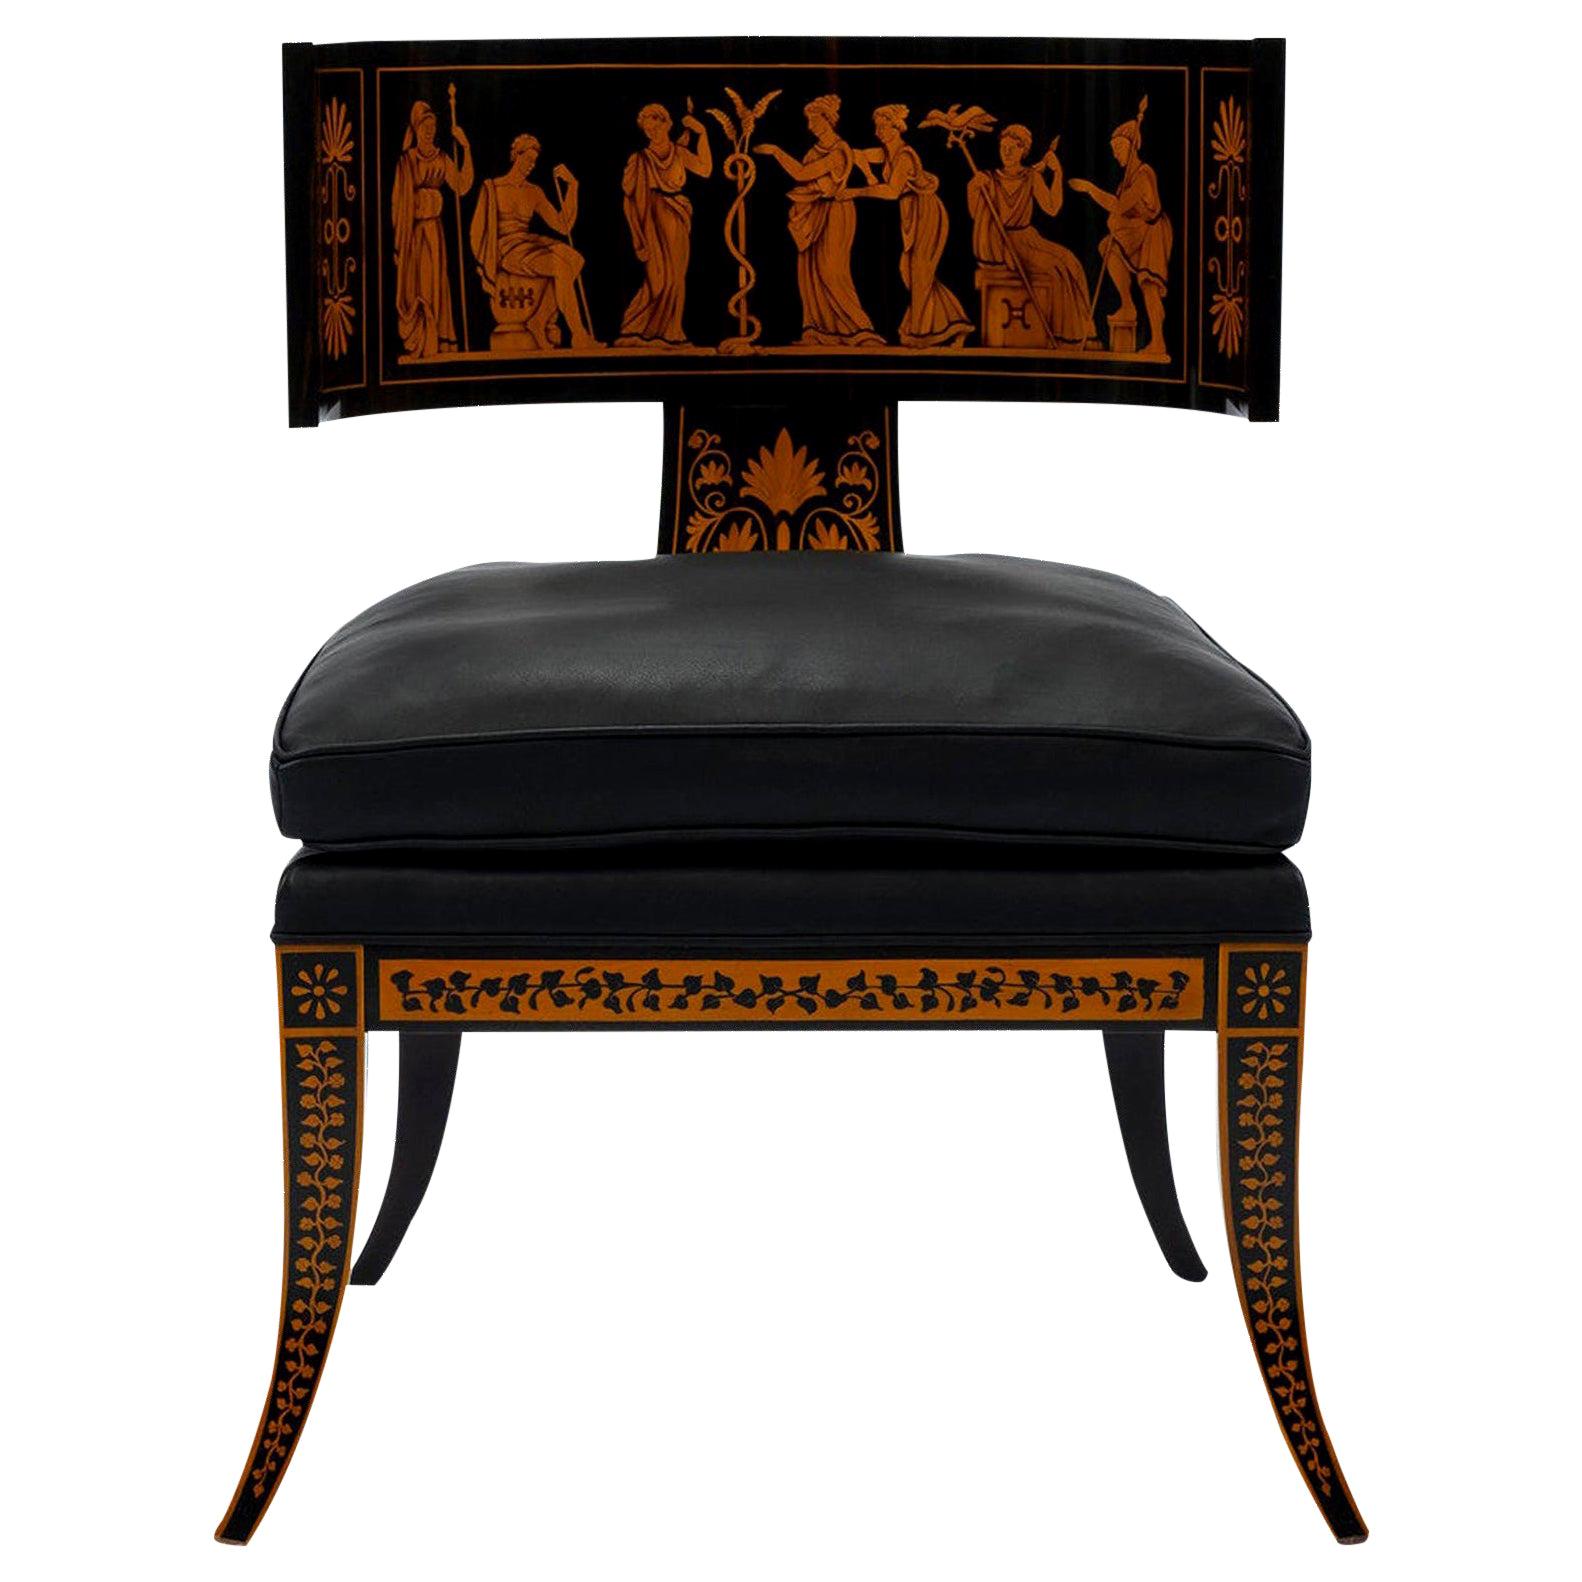 A large scale Italian neoclassical chair finely crafted in ebony and pau marfim veneers. Extraordinary details include a frieze of seven classical figures with floral and foliage detailing. Chair is upholstered in black leather with a loose down